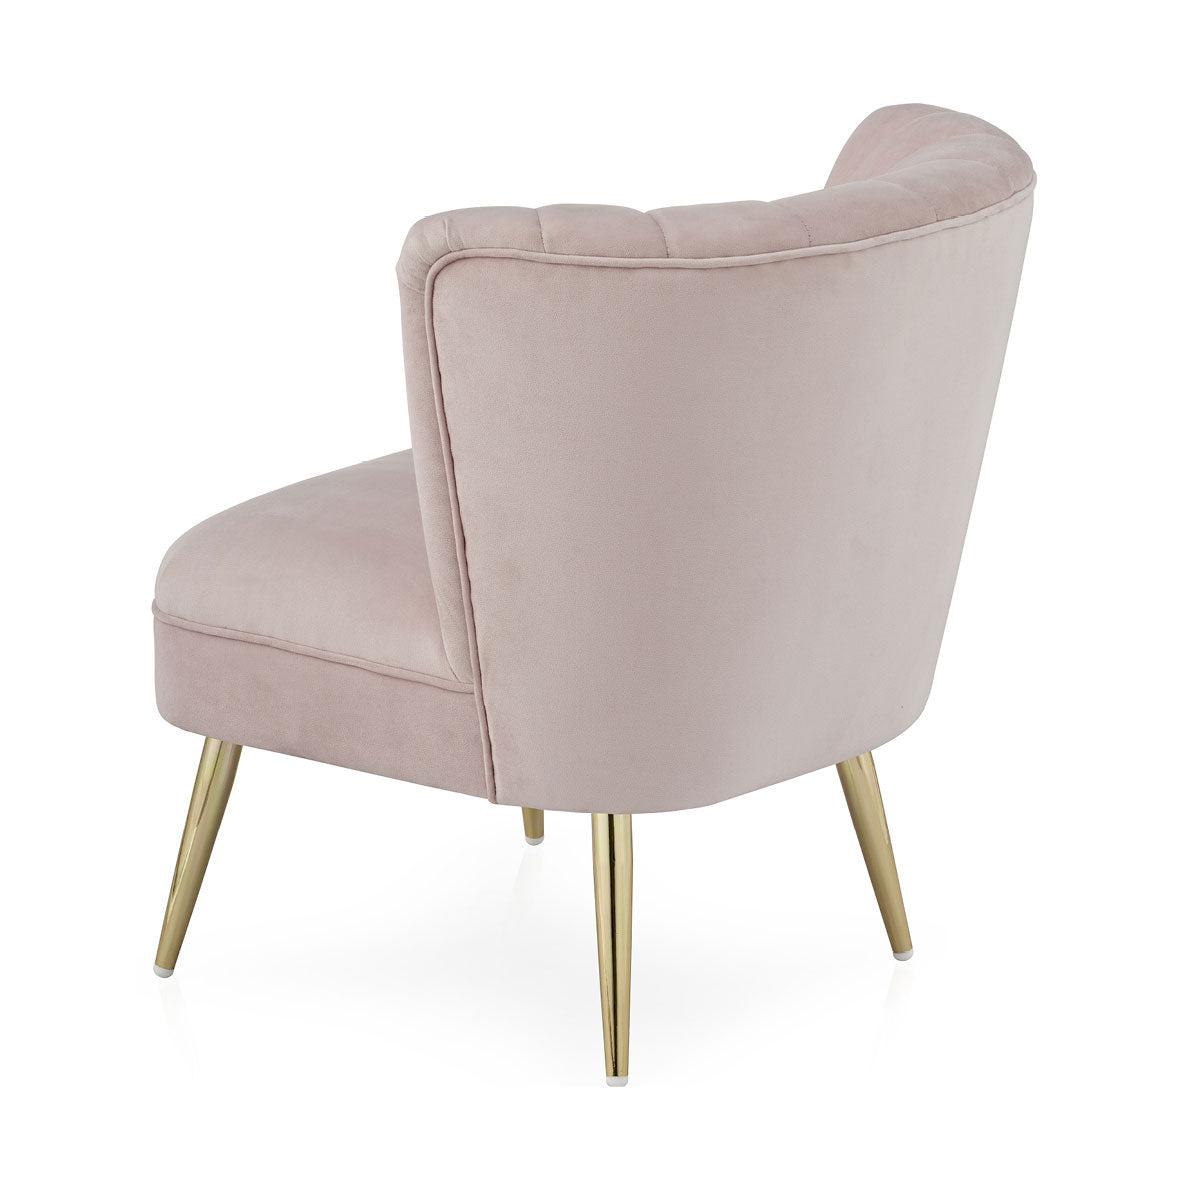 Quince | Cocktail Chair in Blush Pink